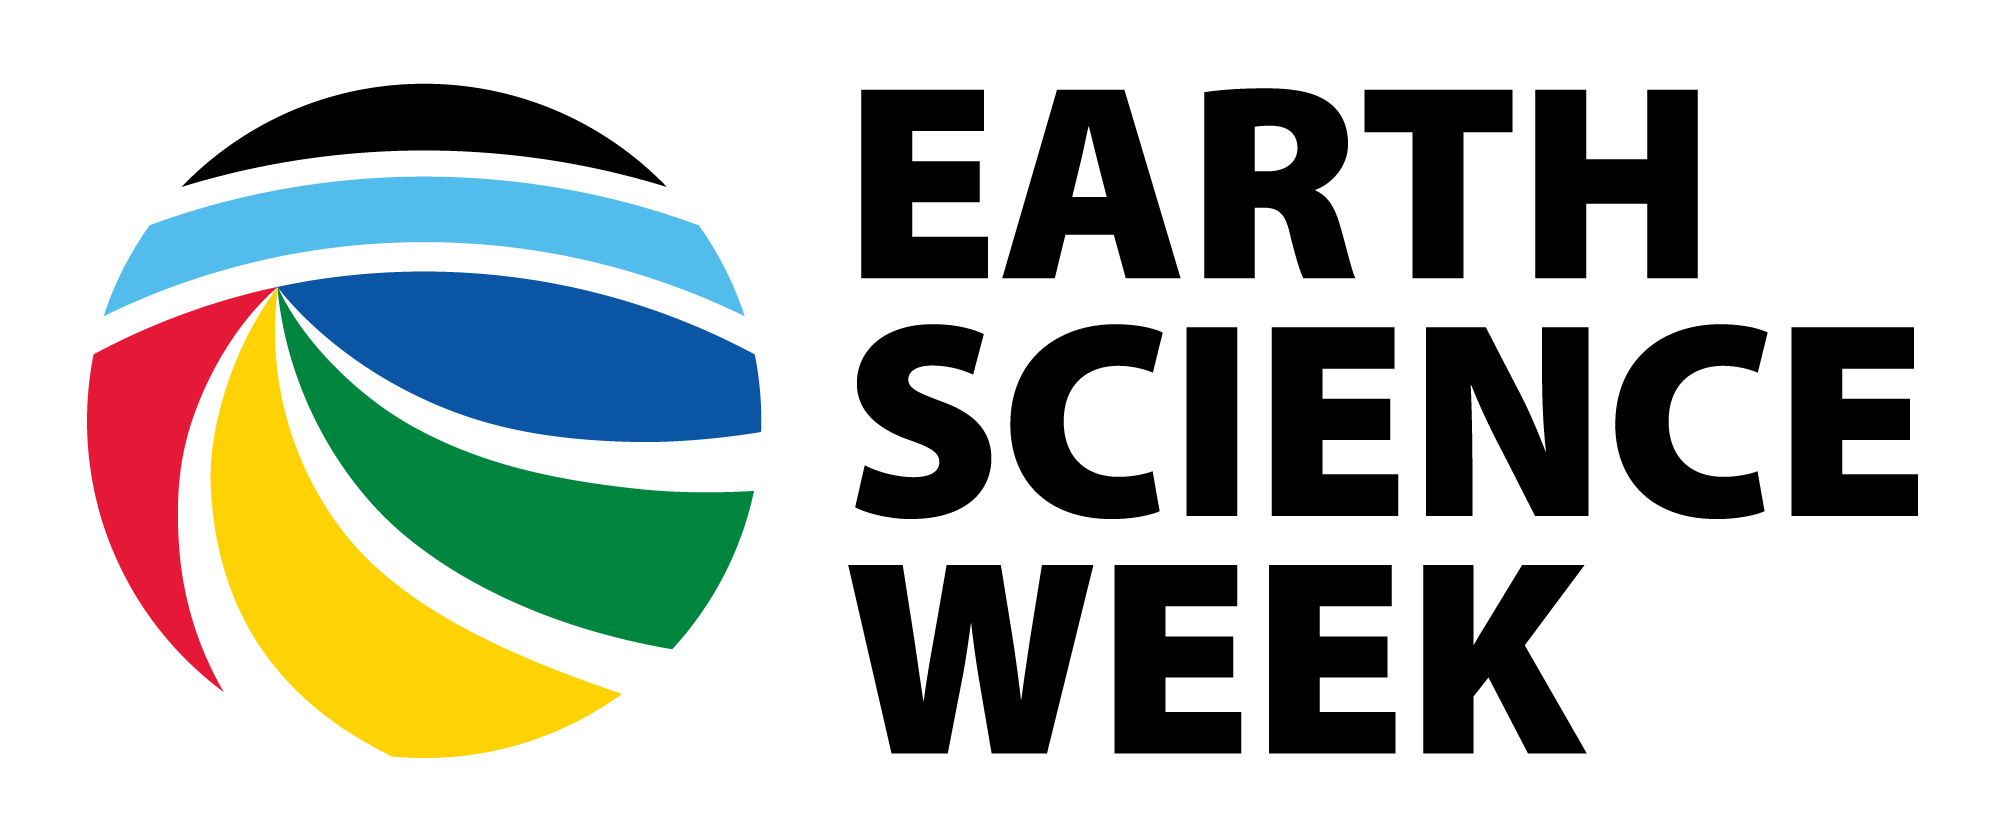 Earth Science Logo - Downloadable Image and Logos. Earth Science Week